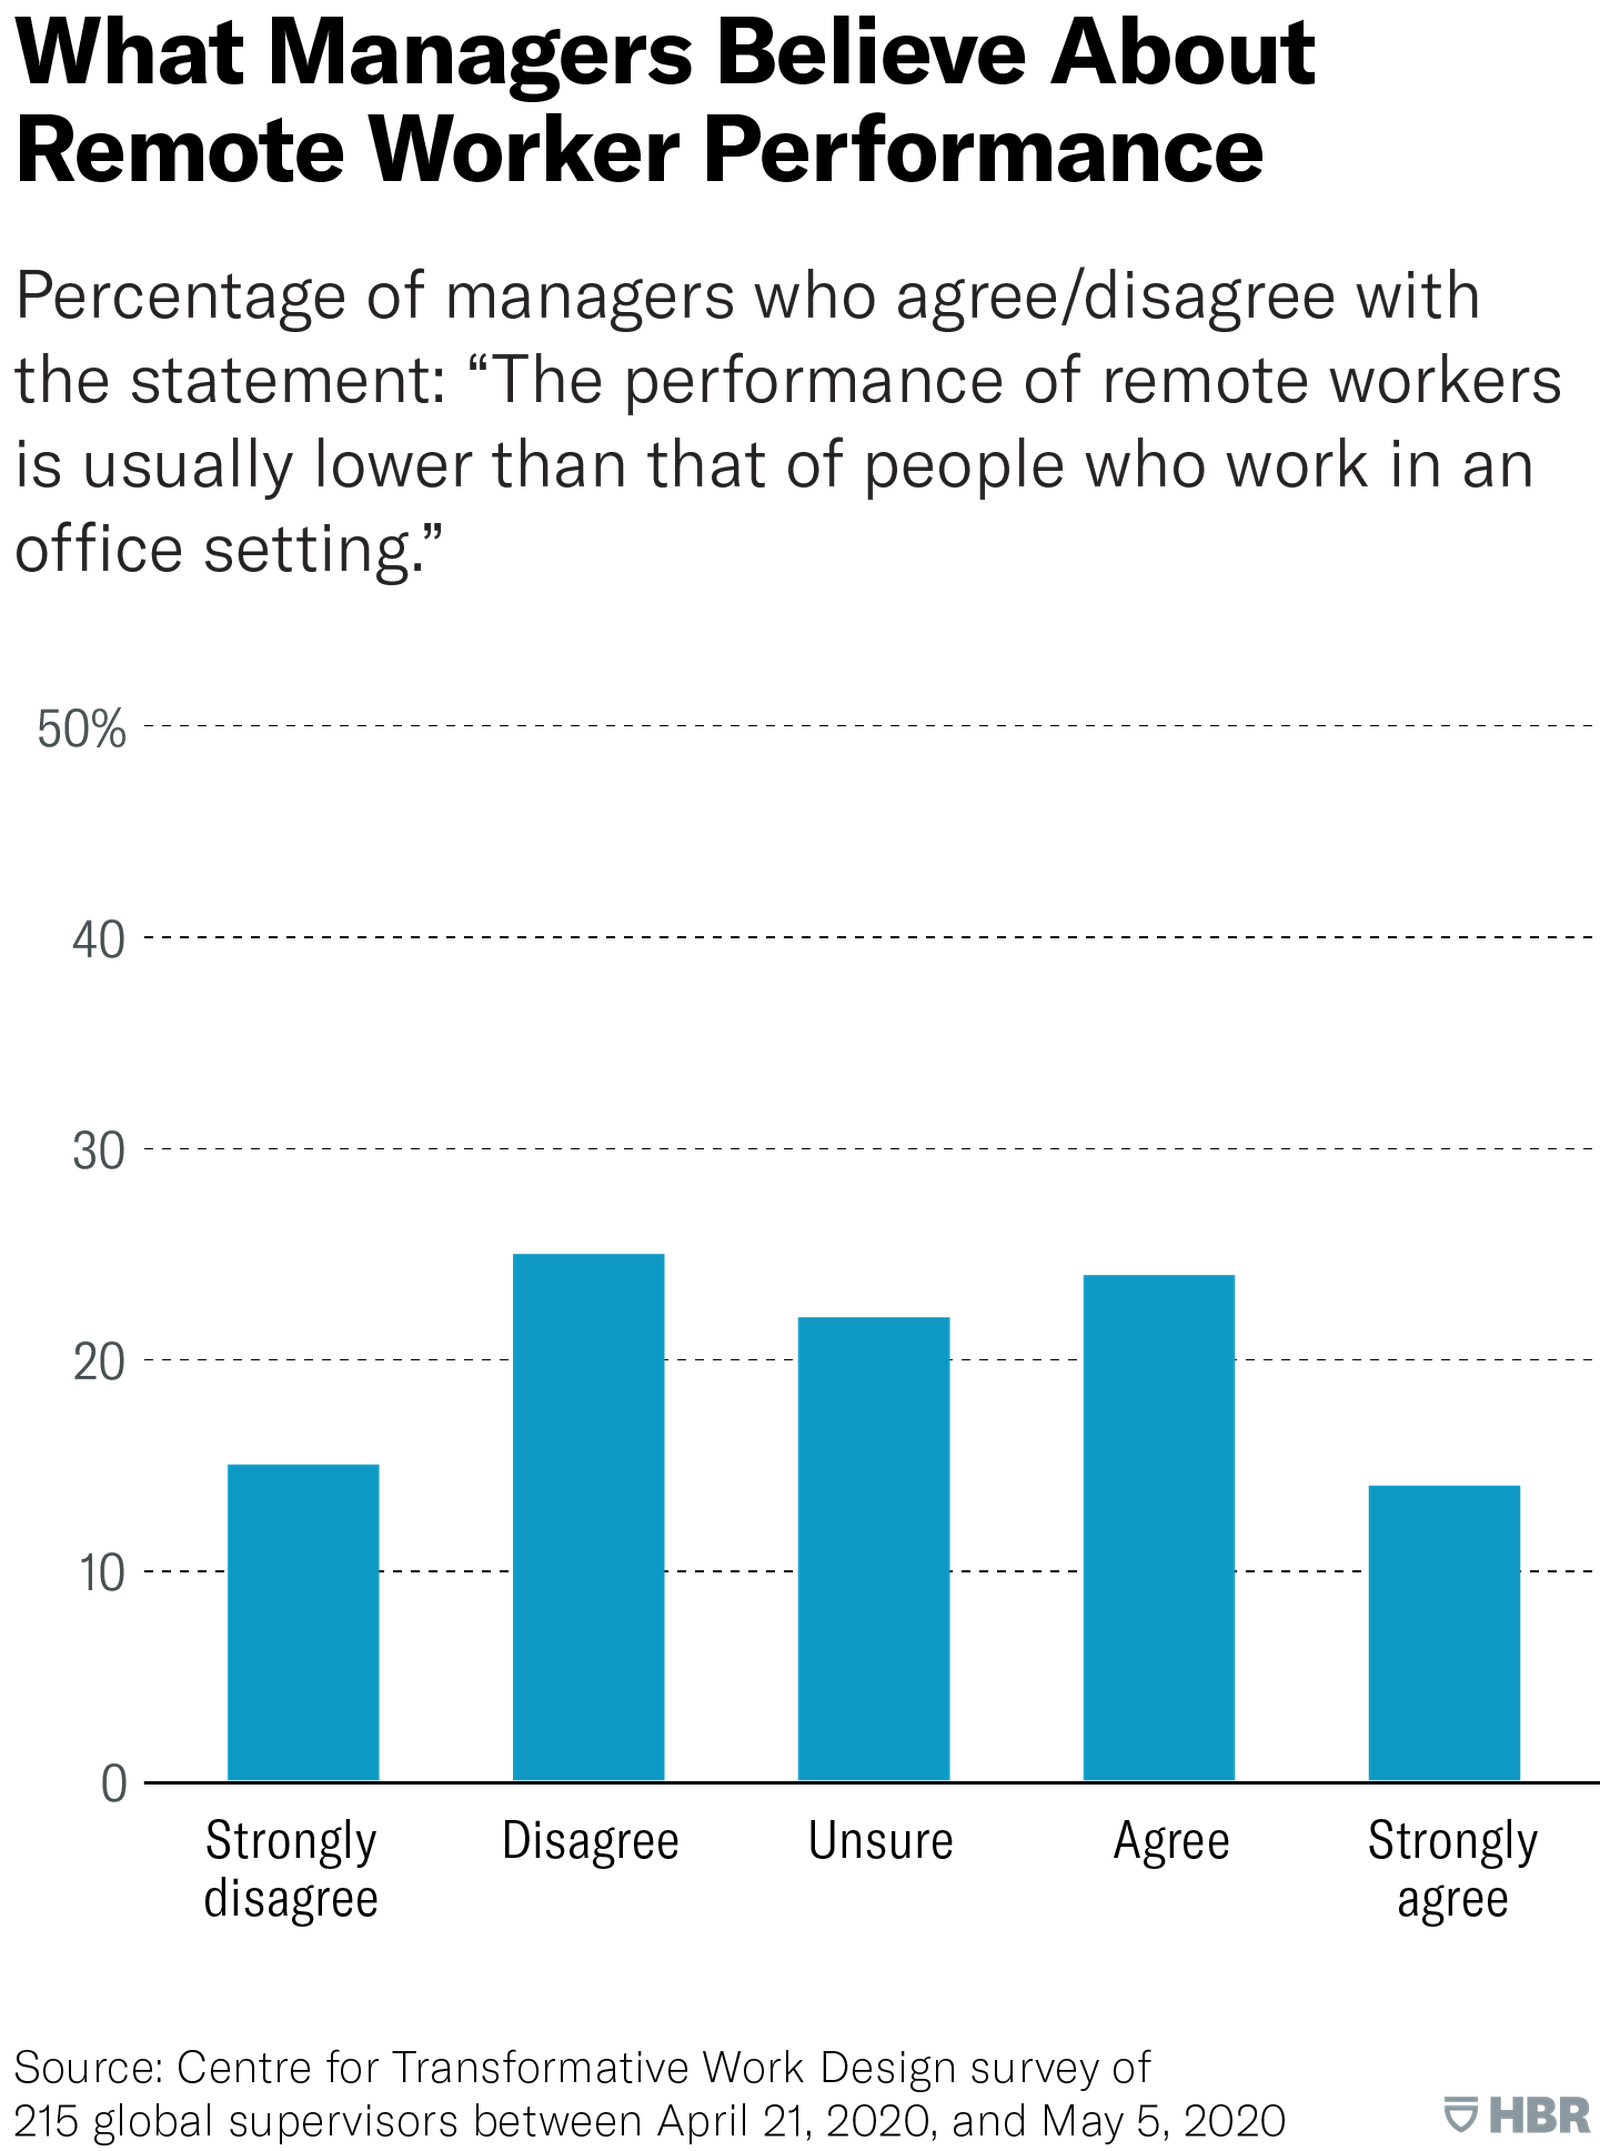 HBR report on remote managers